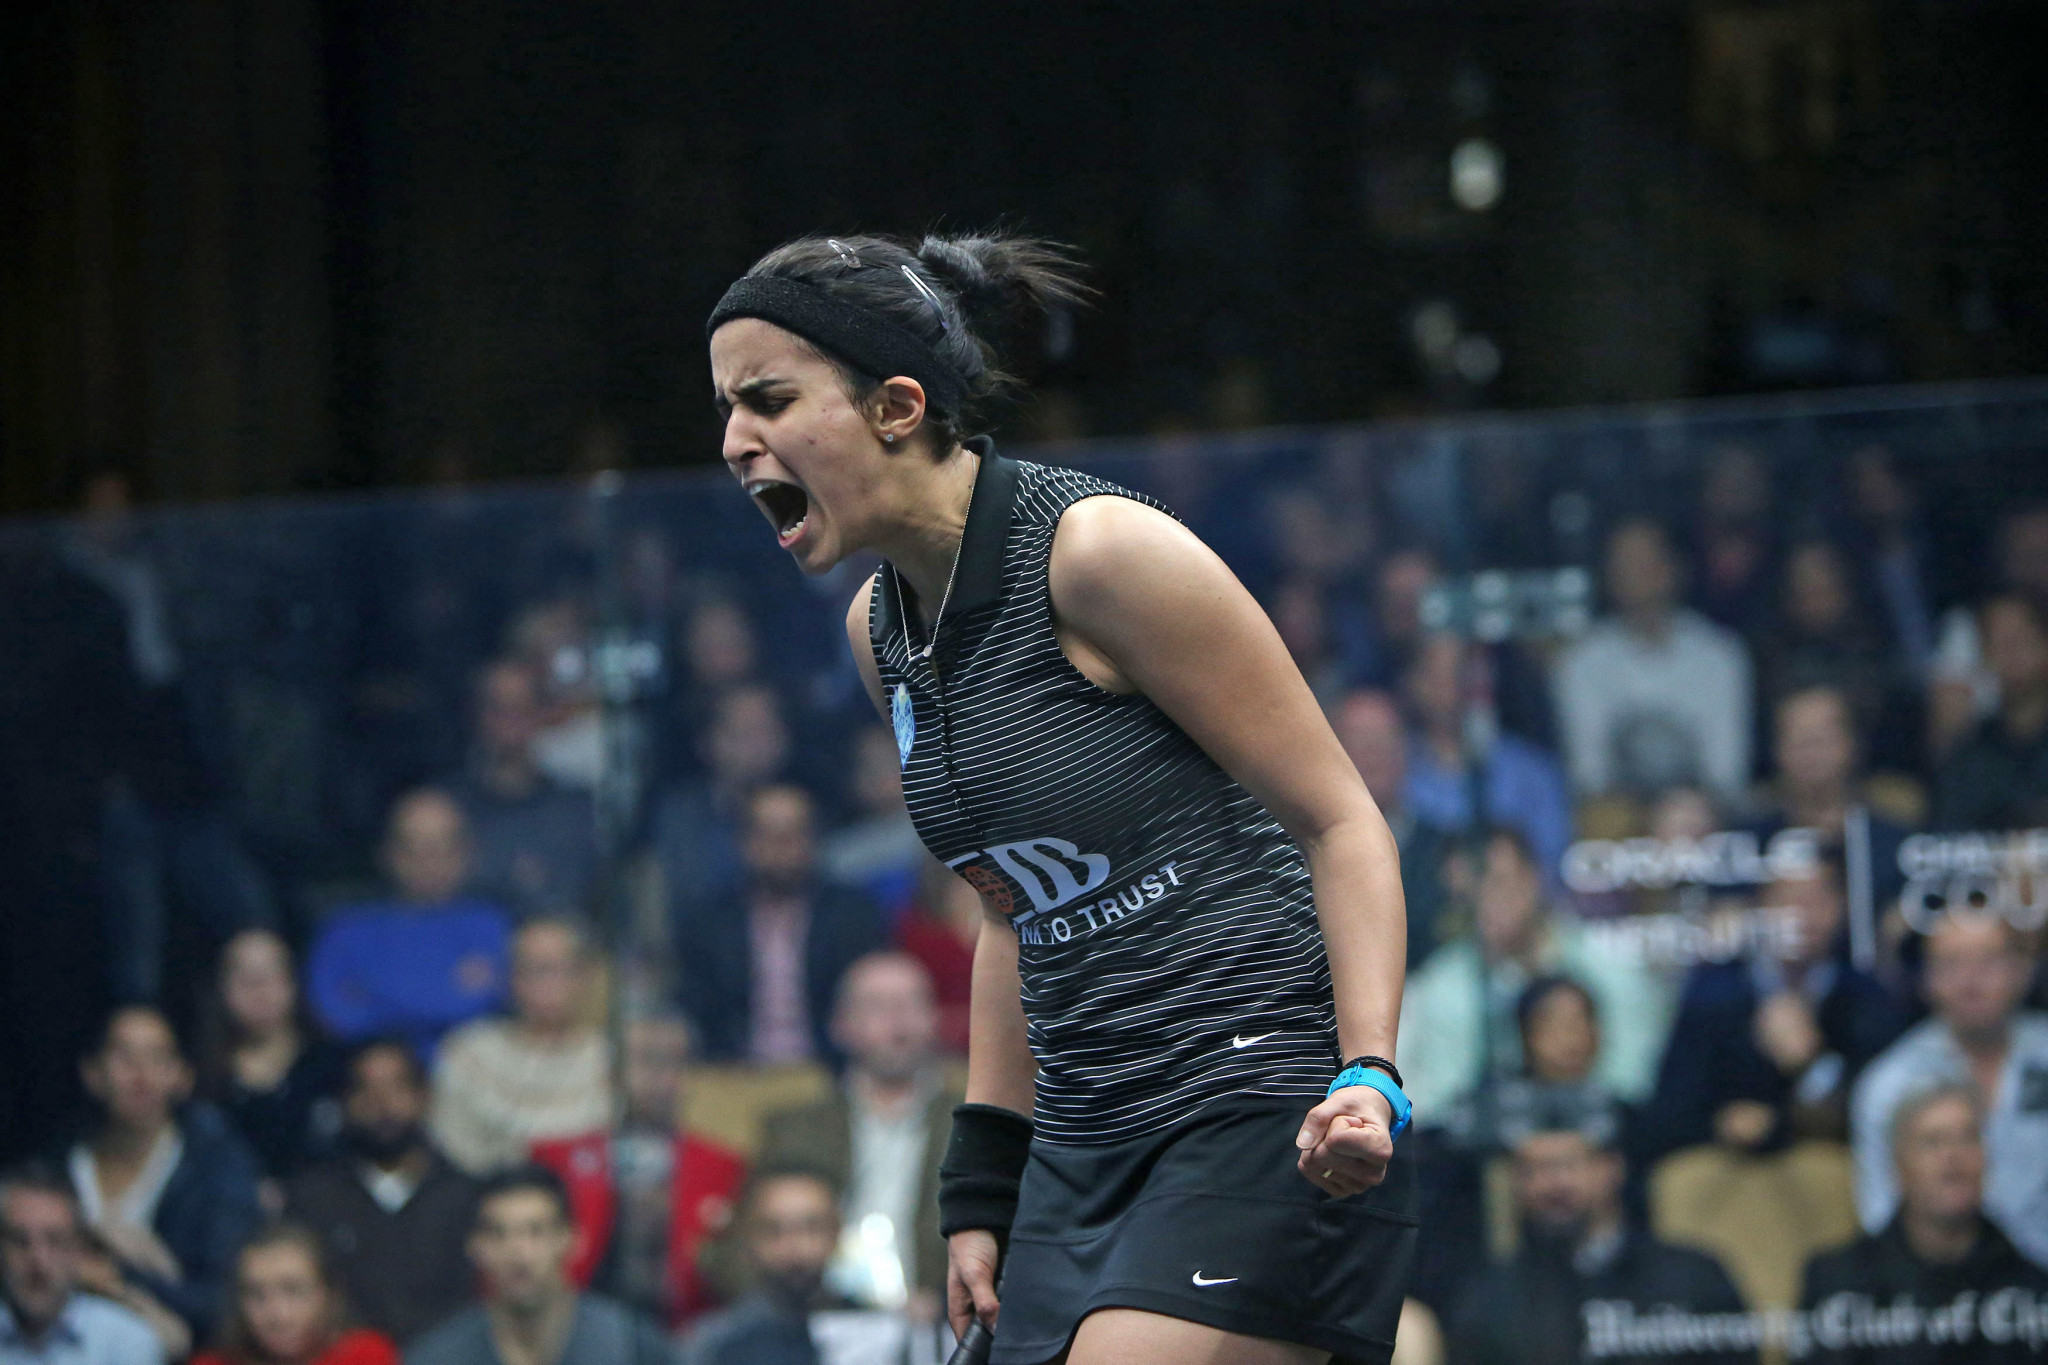 Egypt's Nour El Tayeb saved four match points against Wales' Tesni Evans after admitting she was struggling before reaching the quarter-final of the Windy City Open ©PSA